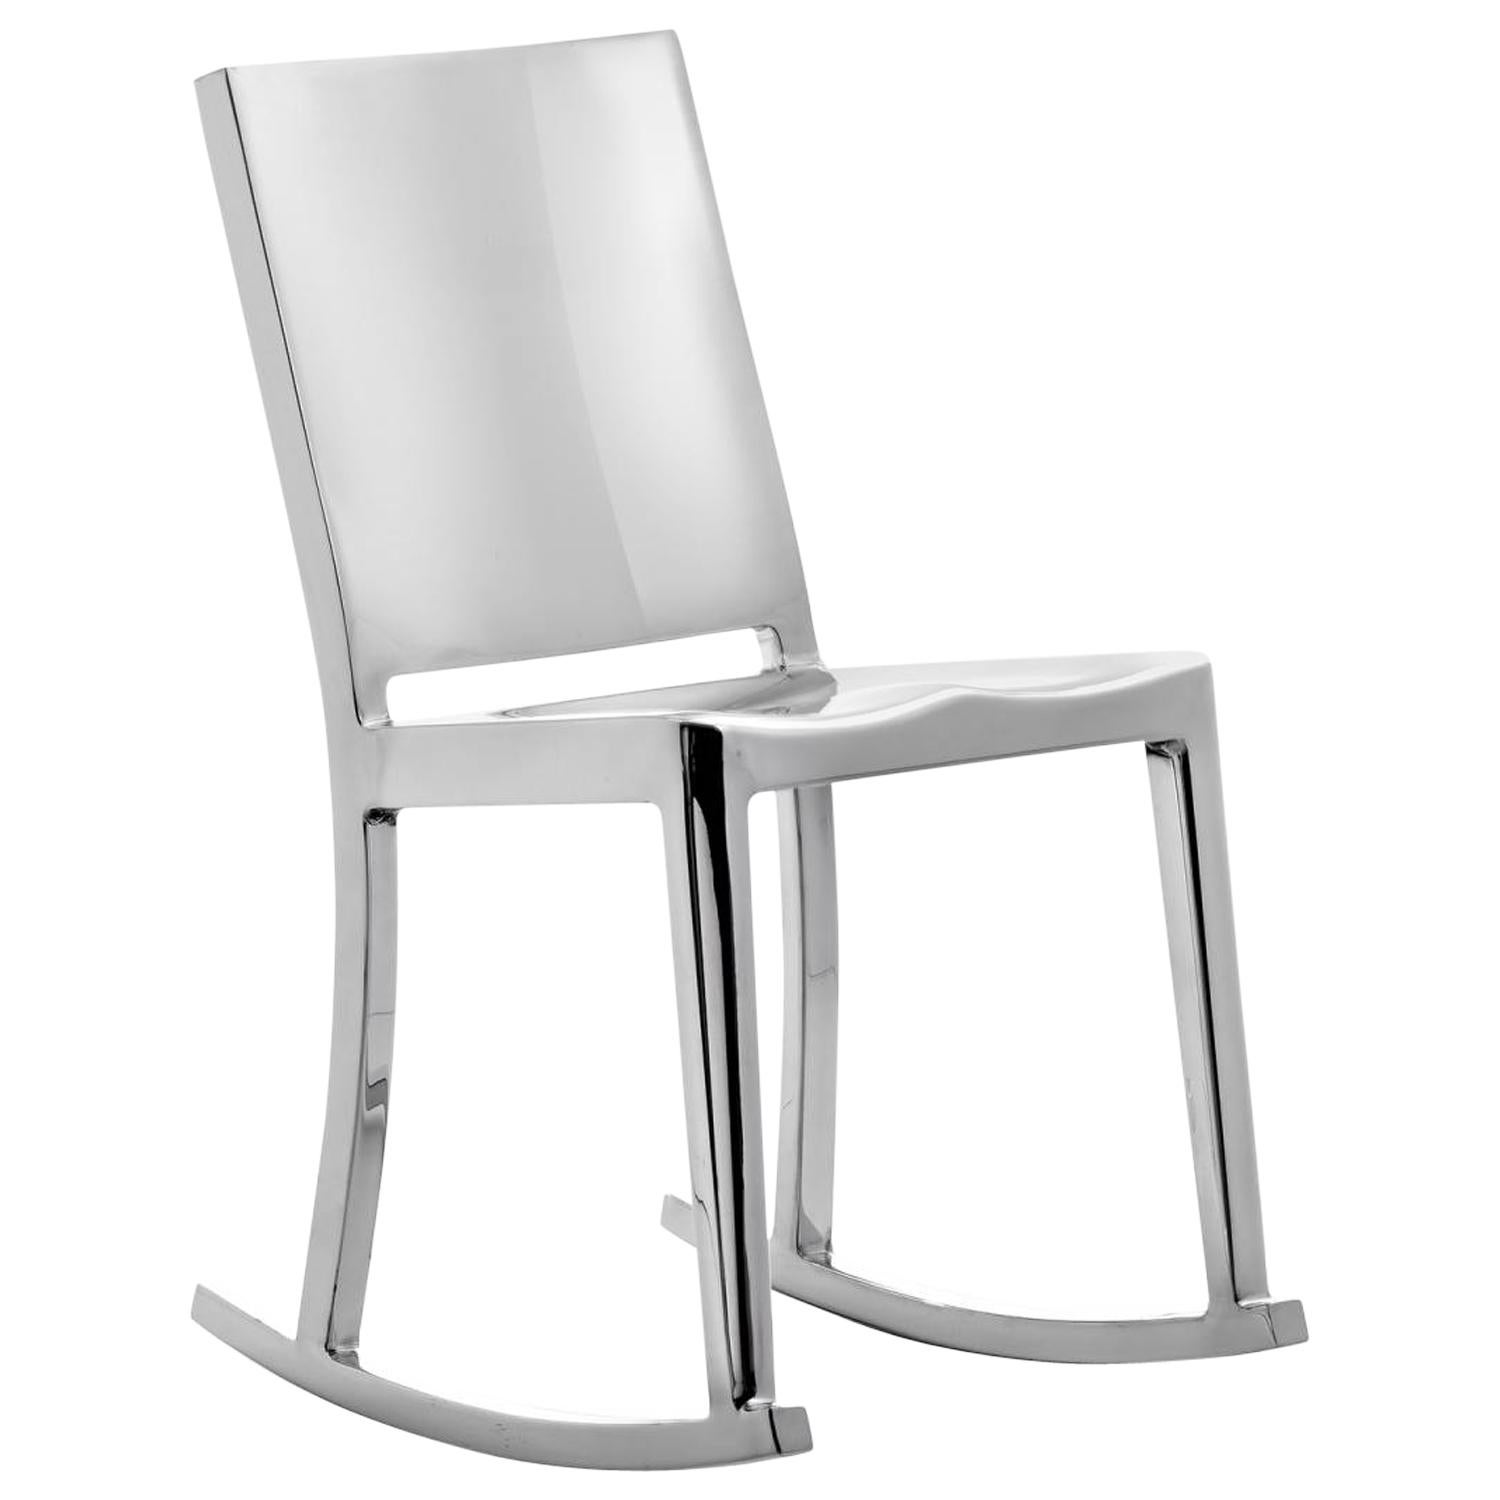 Emeco Hudson Rocking Chair in Polished Aluminum by Philippe Starck